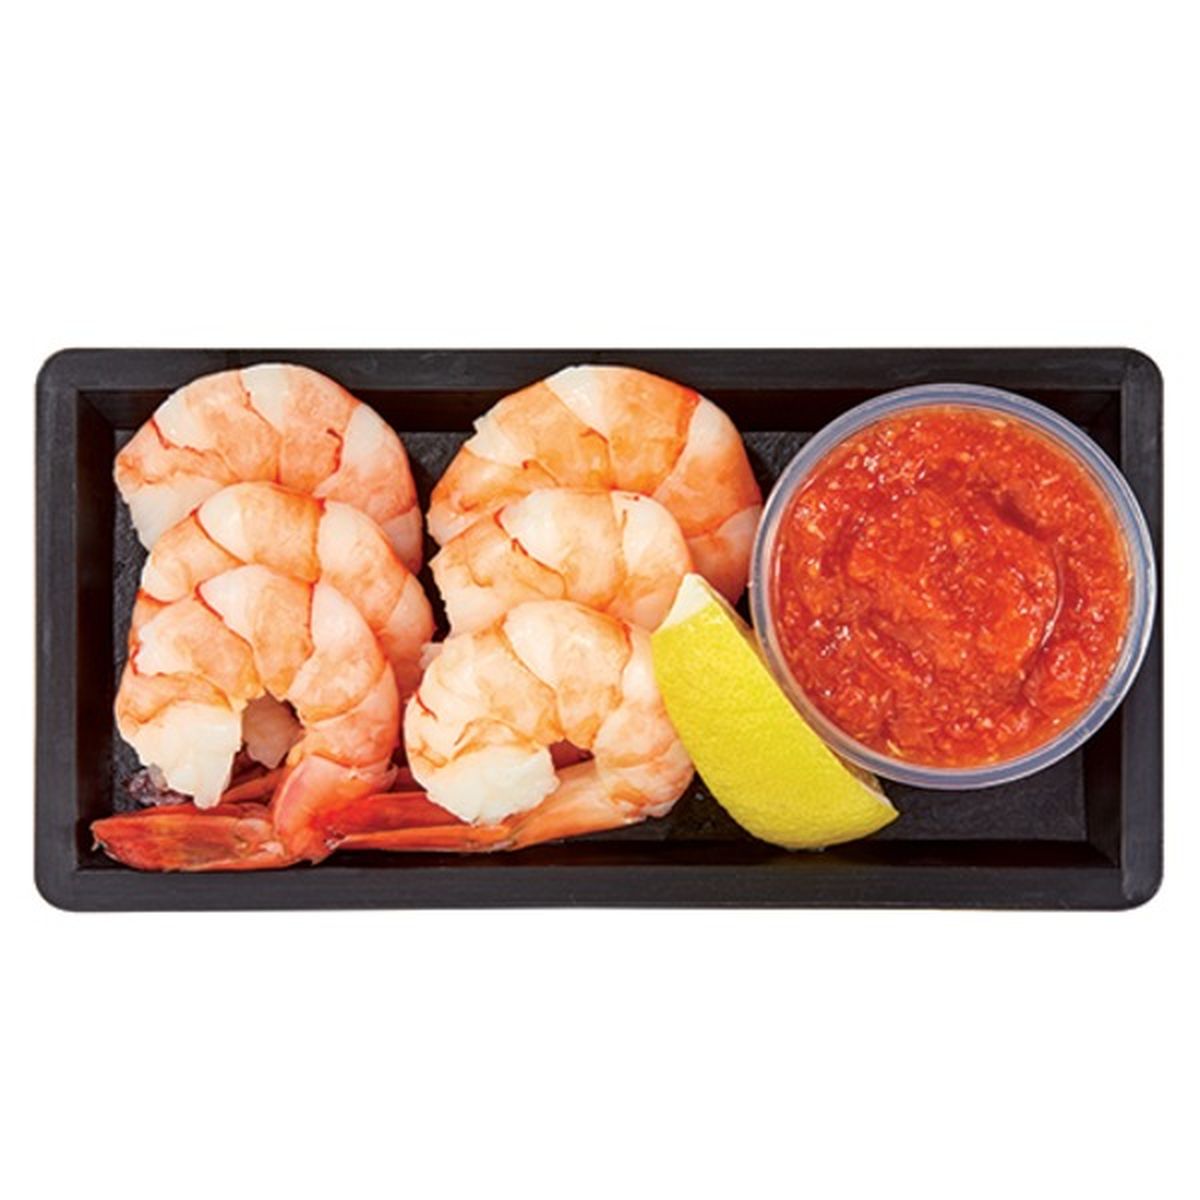 Calories in Wegmans Organic Shrimp Cocktail Tray, Fresh Cooked, 6 Count